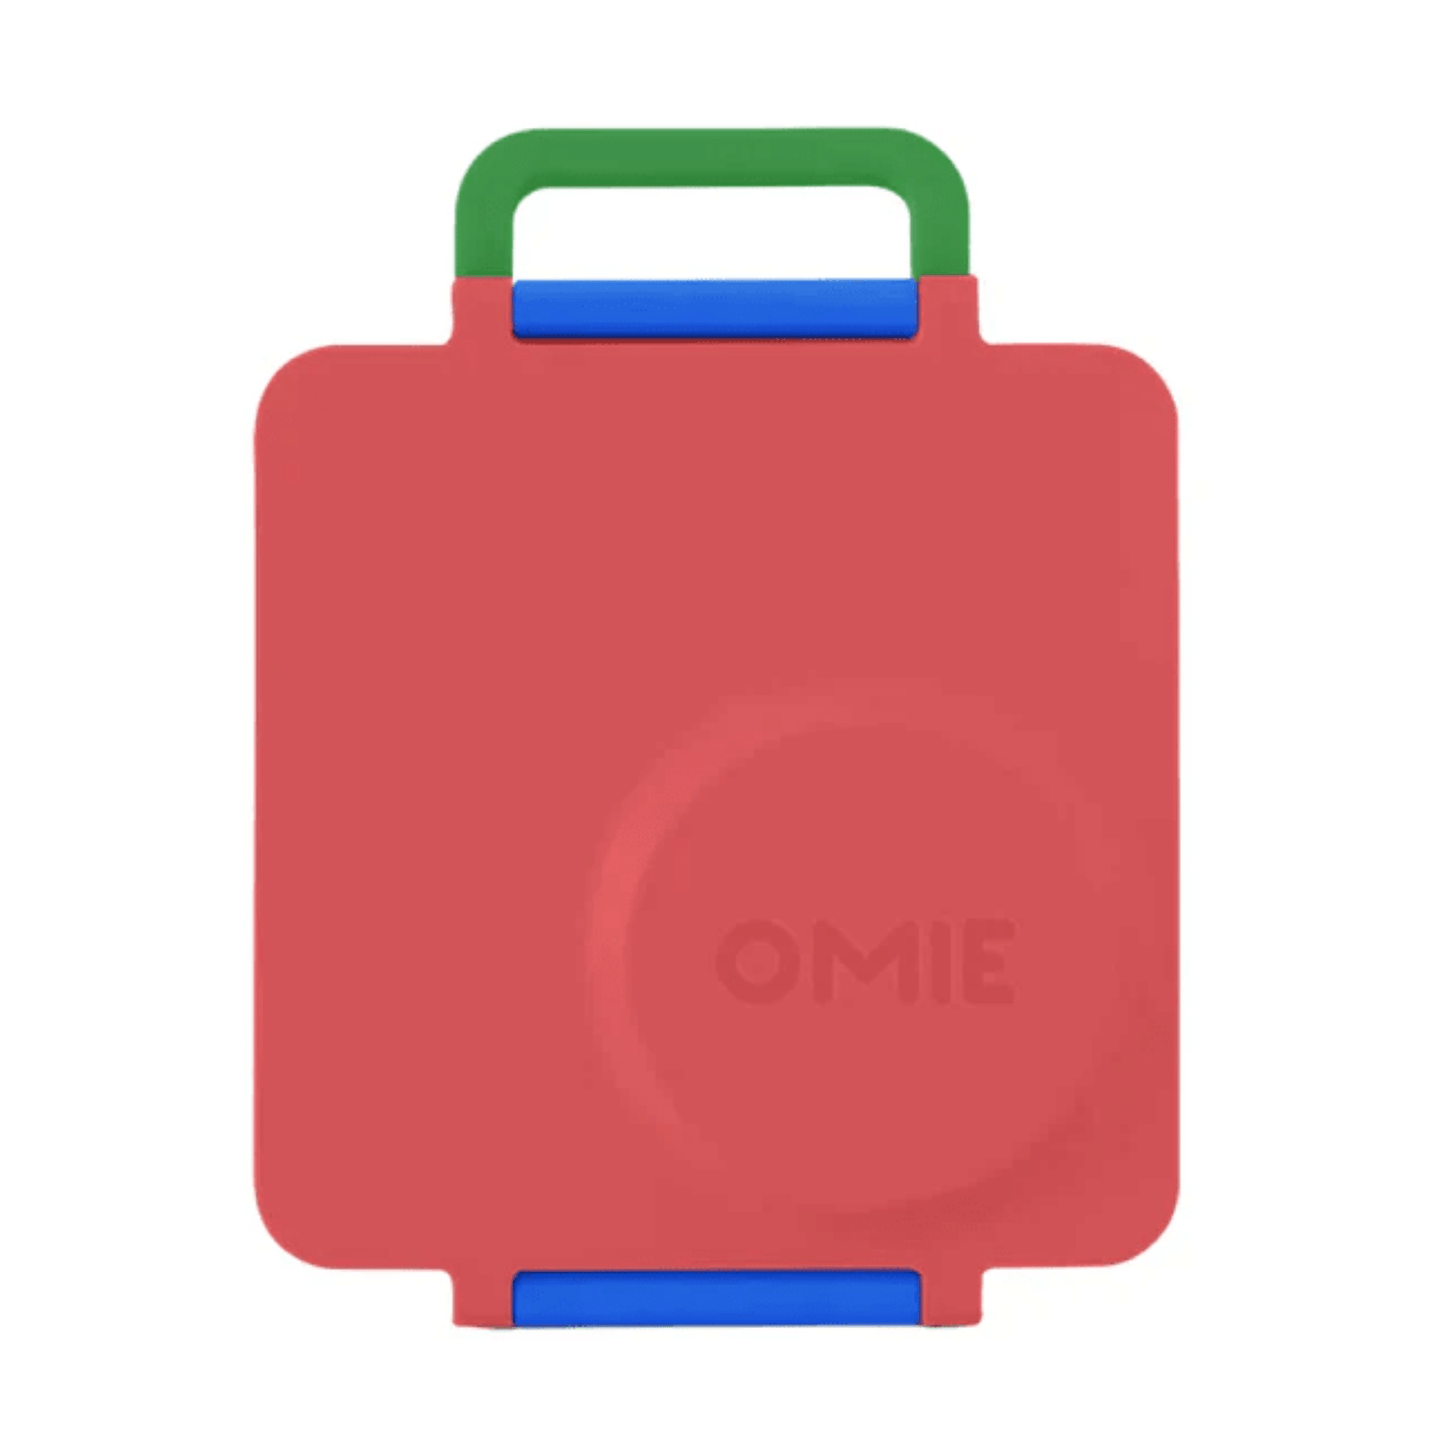 OmieBox V2 Kids Thermos-Insulated Hot & Cold Bento Box for Kids Scooter Red 